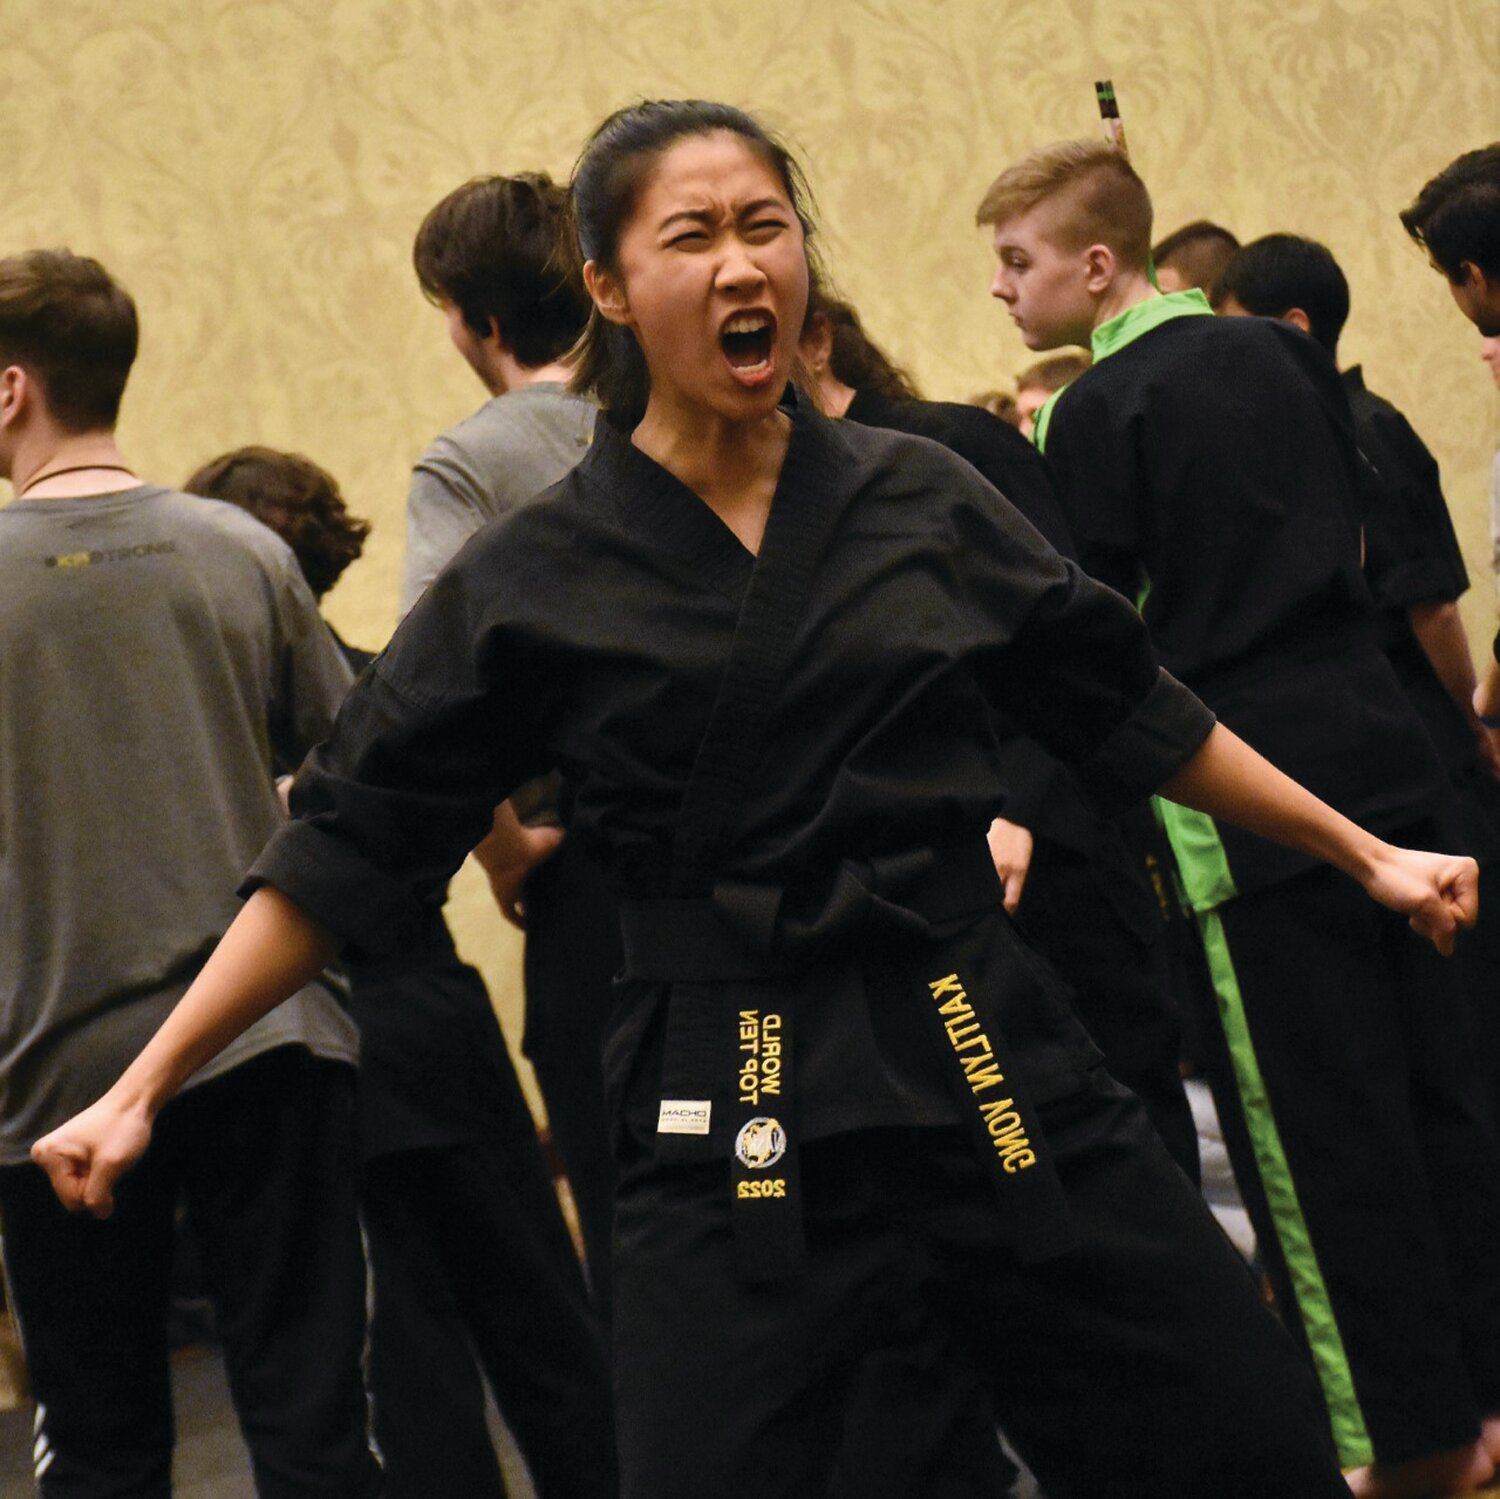 PUTTING ON A SHOW: Katelyn Vong performs at the Grand Nationals. (Photo by Tim Stanton)